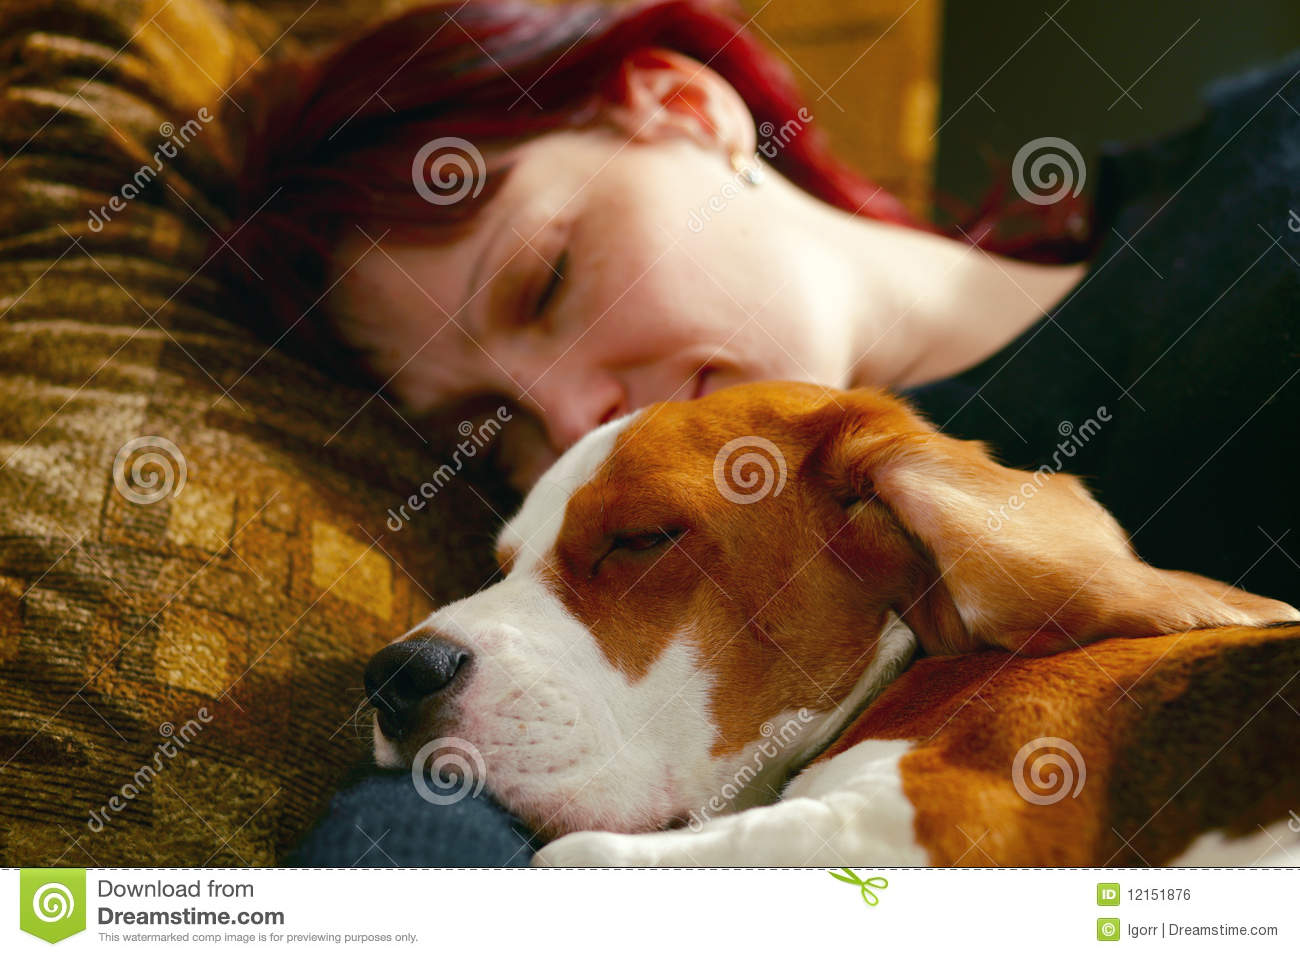 The Woman Who Has Fallen Asleep With The Puppyfocus On A Dog